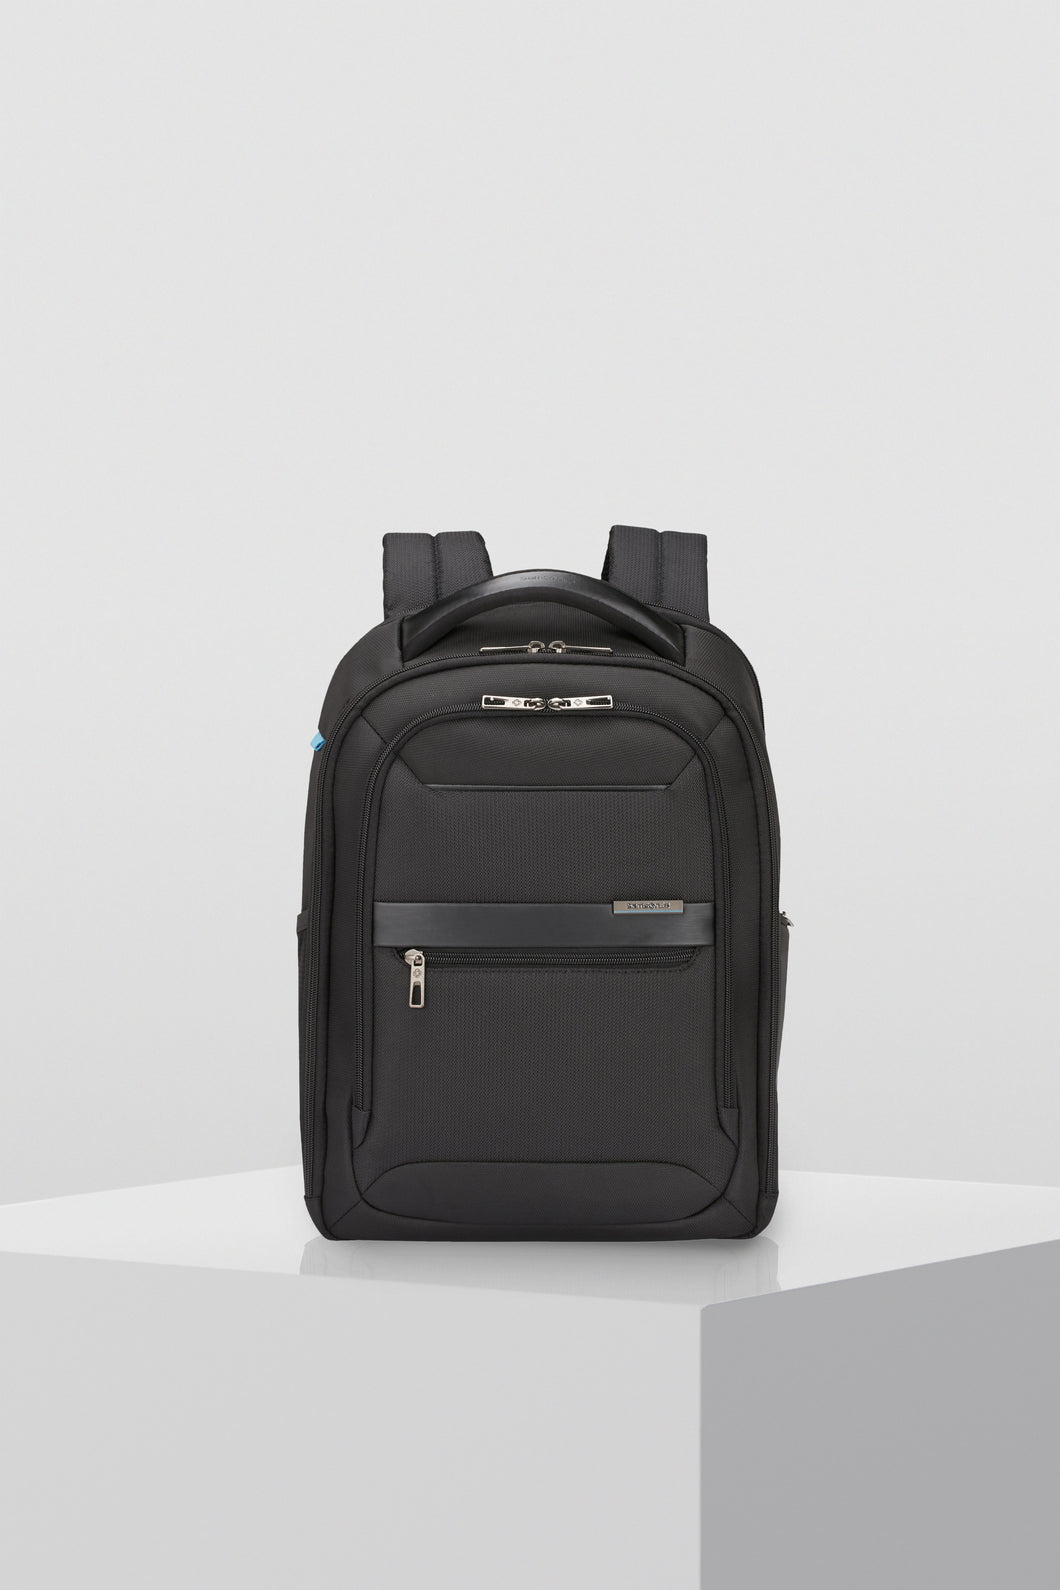 VECTURA EVO Laptop Backpack 14.1